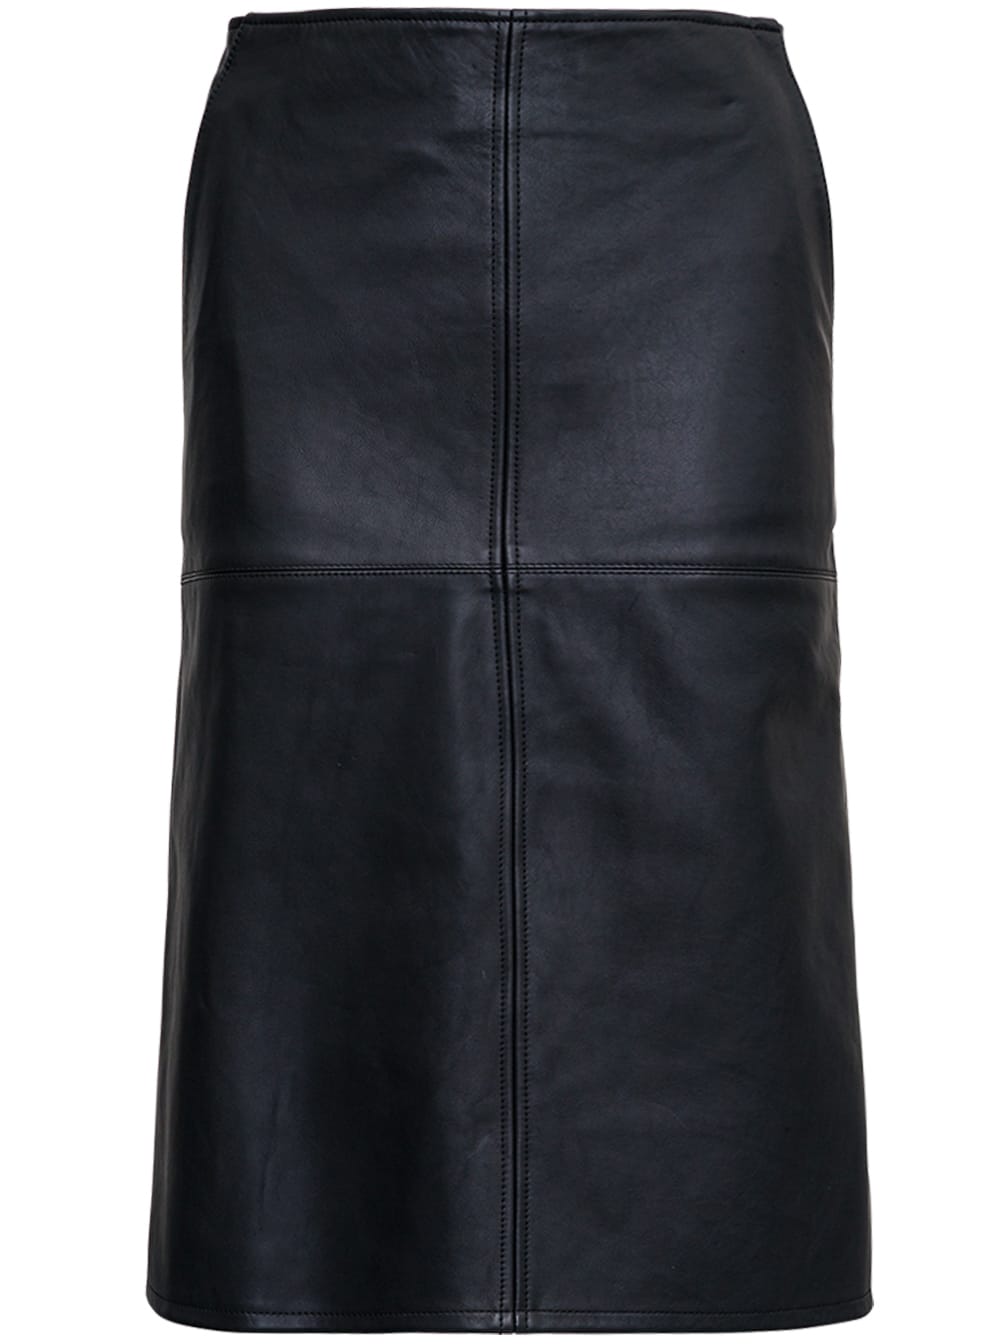 Mauro Grifoni A Line Black Leather Skirt